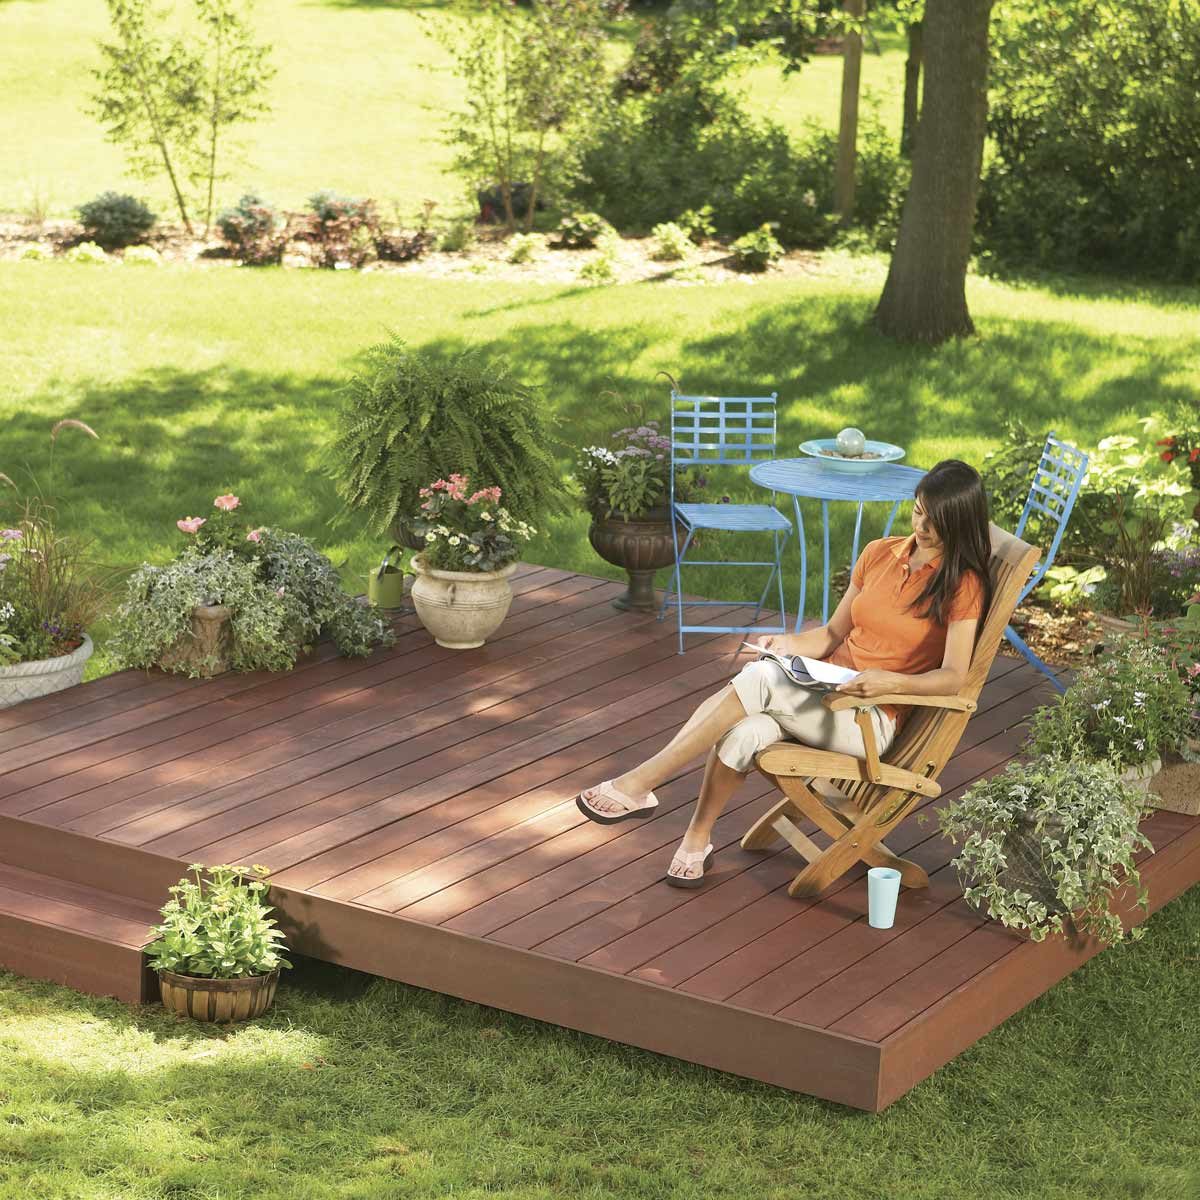 How To Design A Deck For The Backyard